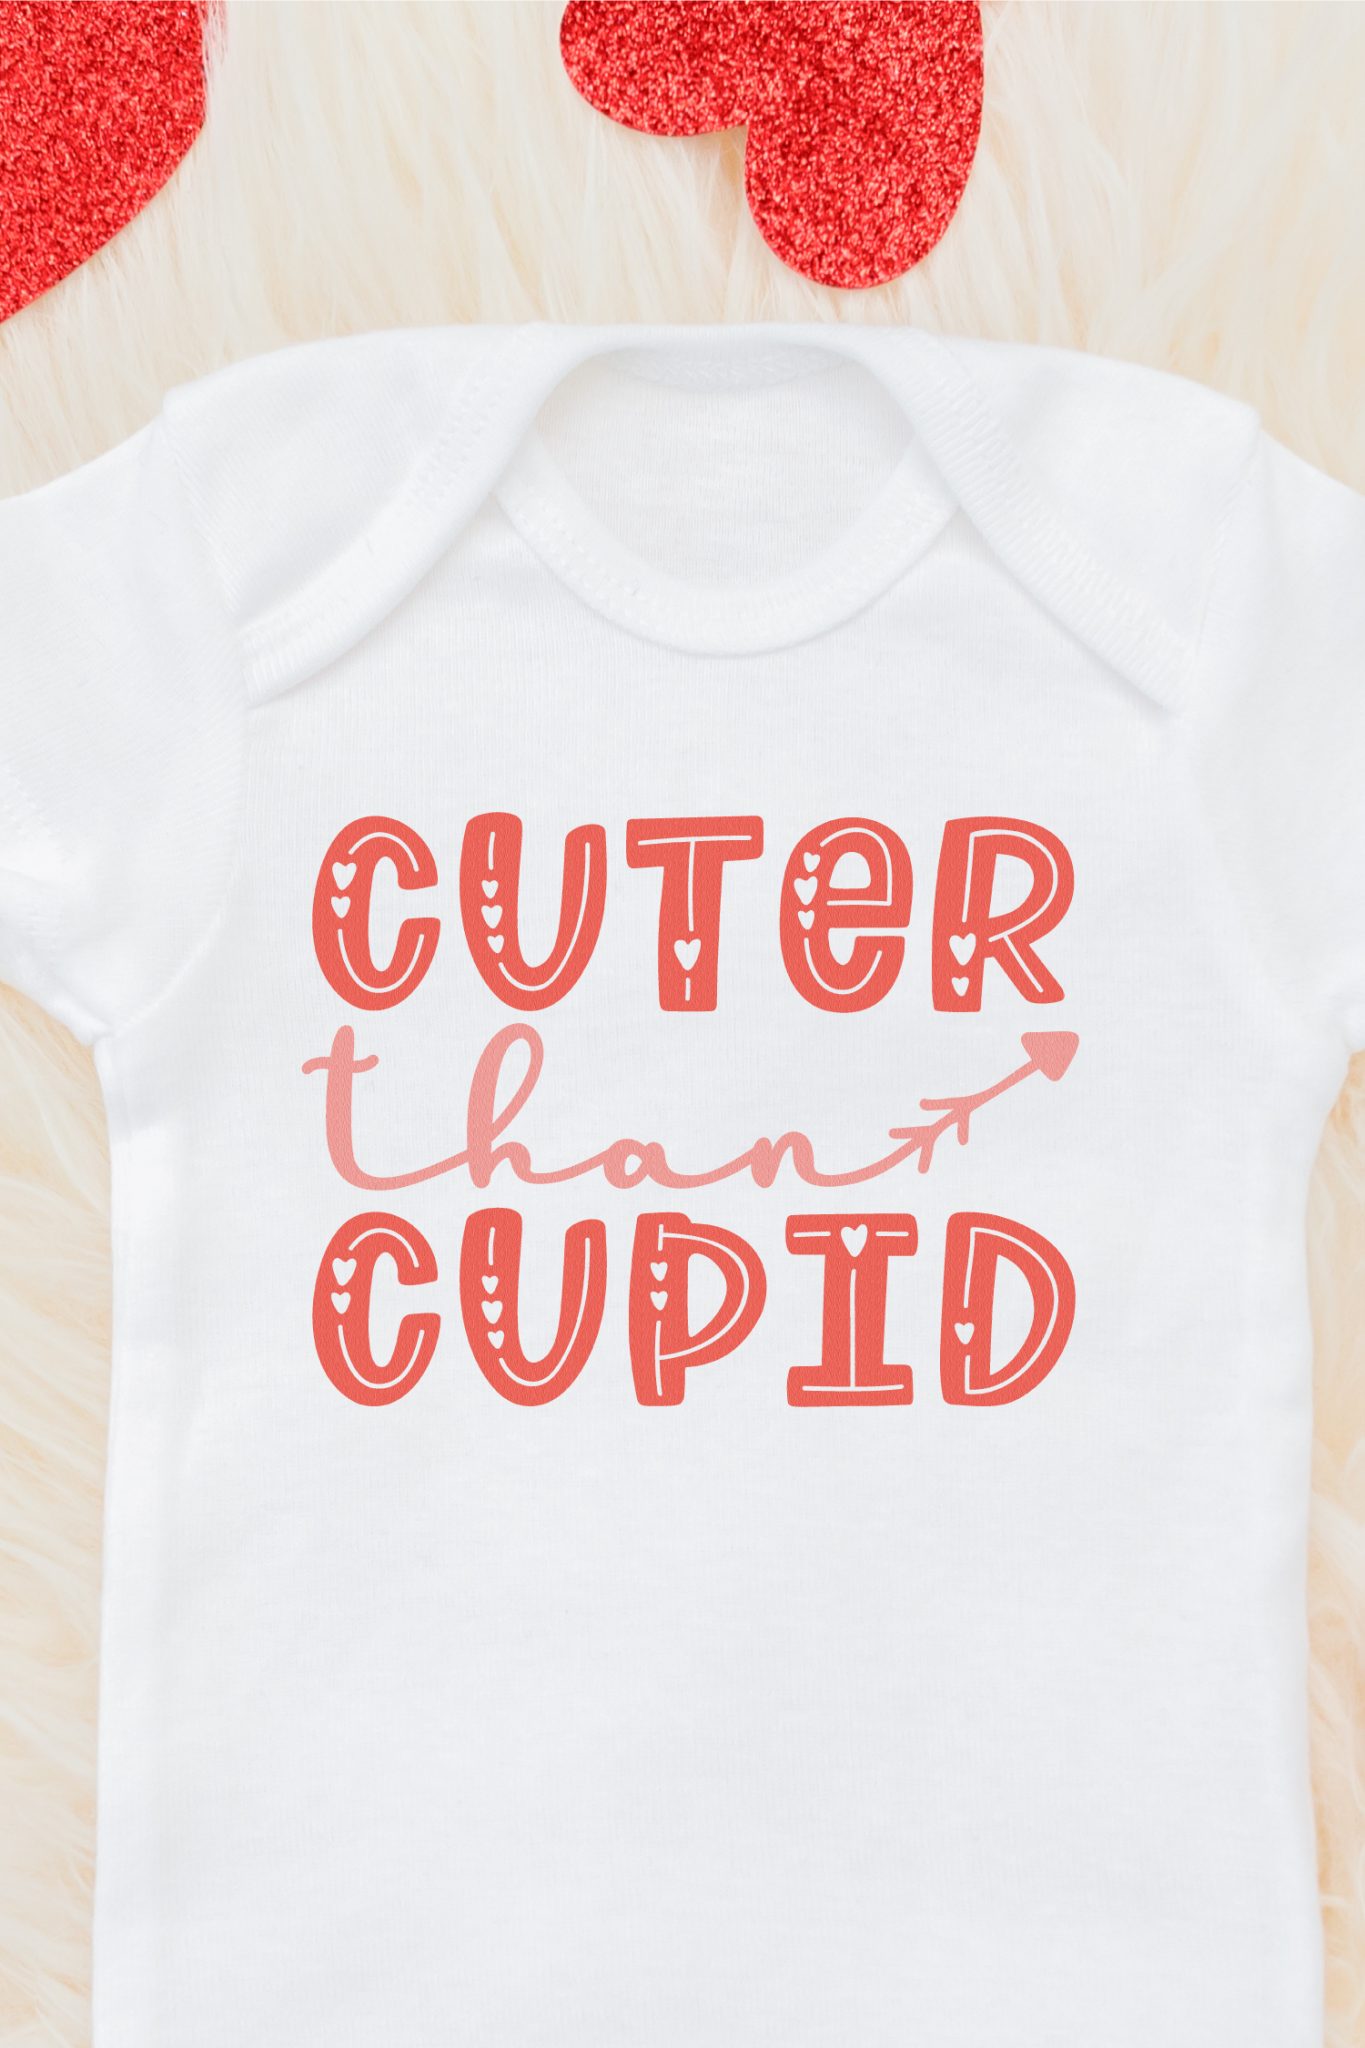 Little Valentine Onesies with Free Cut Files - Hey, Let's Make Stuff